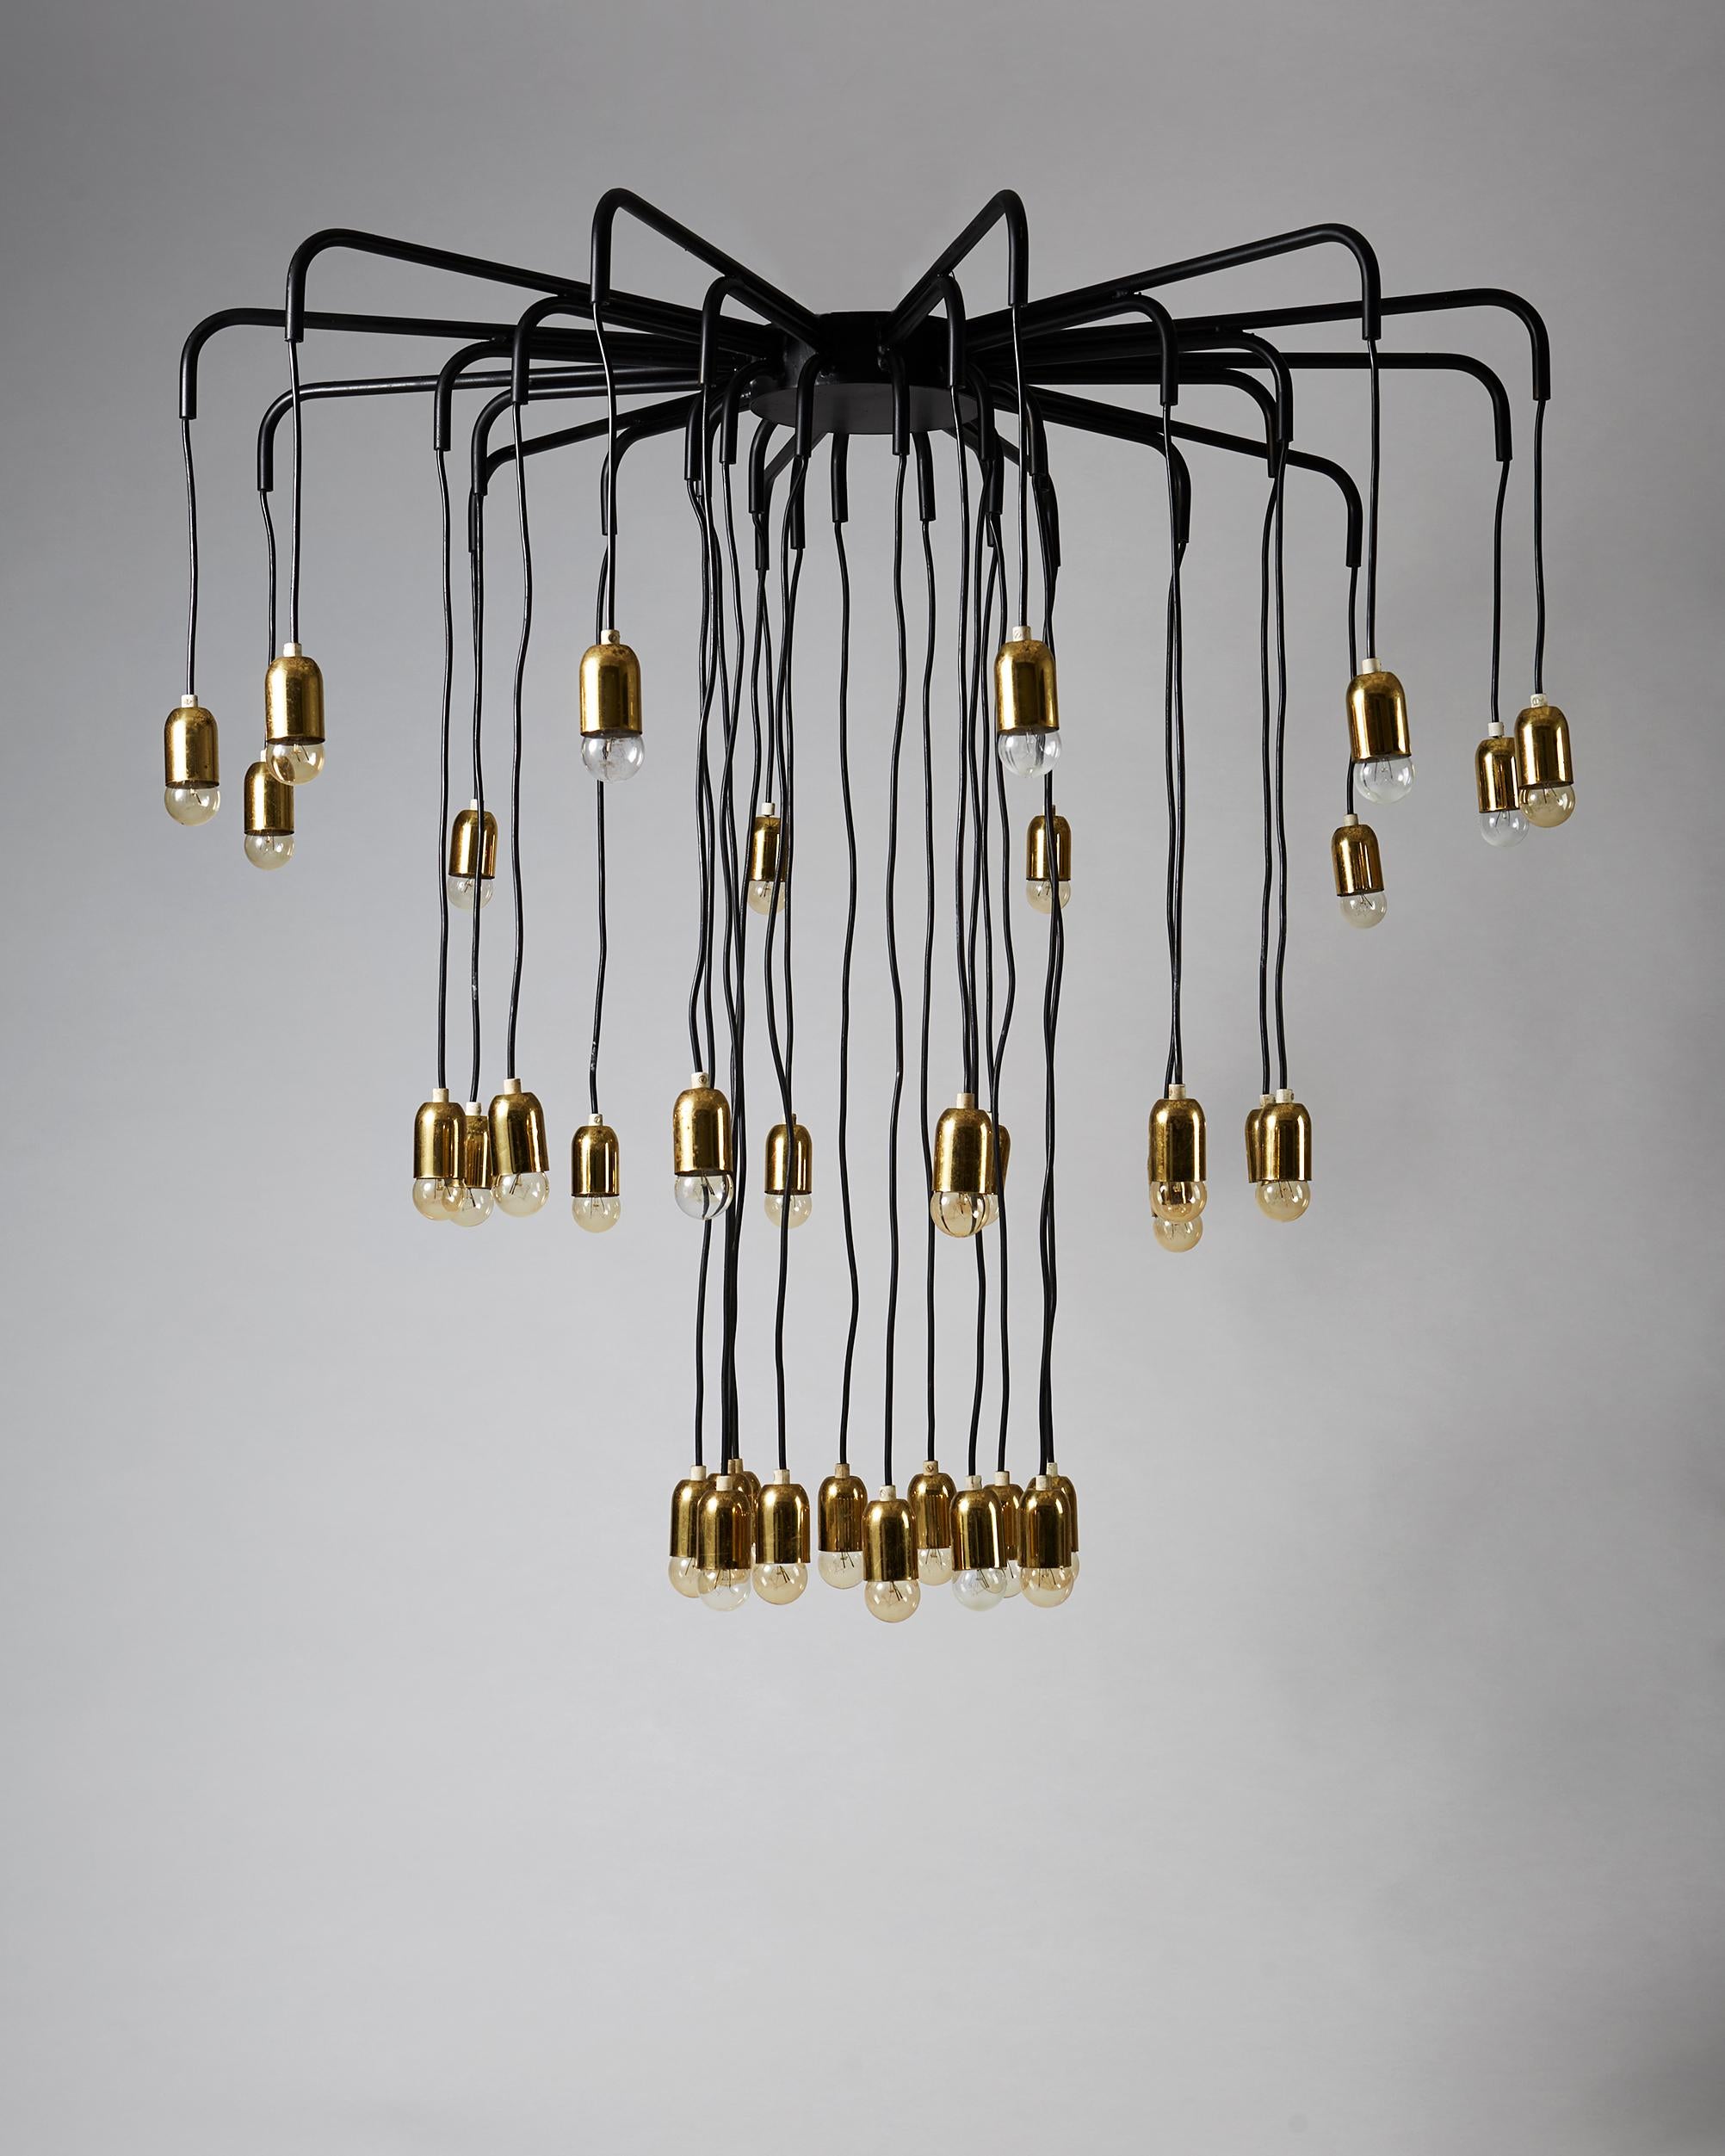 Brass and steel. 

Height: 100 cm/ 3' 3 3/8